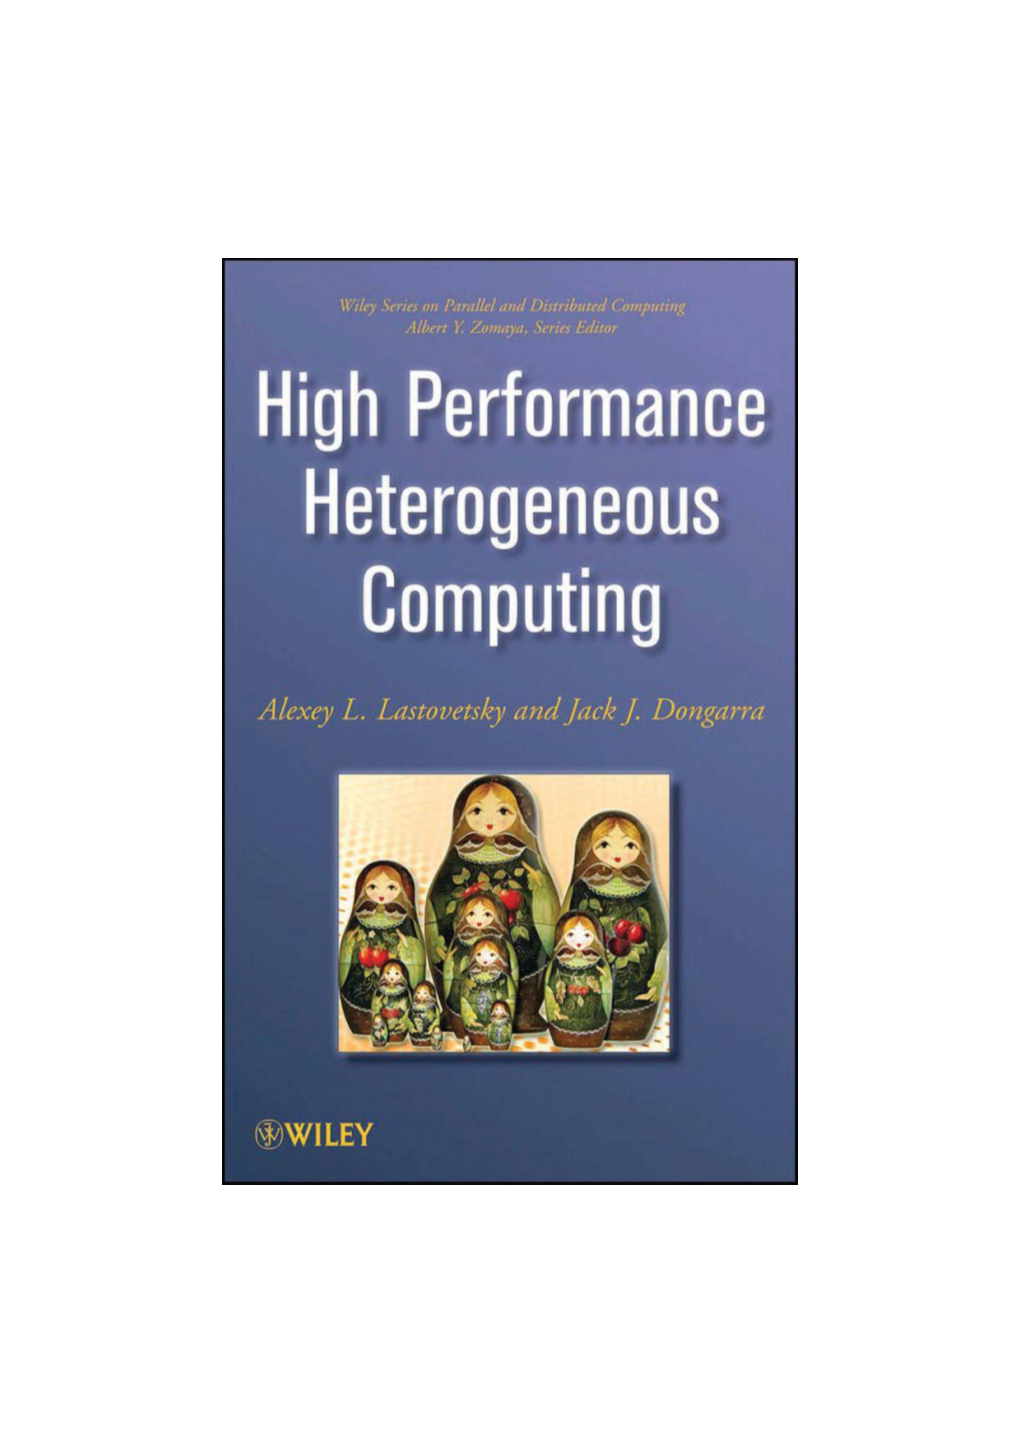 HIGH-PERFORMANCE HETEROGENEOUS COMPUTING WILEY SERIES on PARALLEL and DISTRIBUTED COMPUTING Series Editor: Albert Y